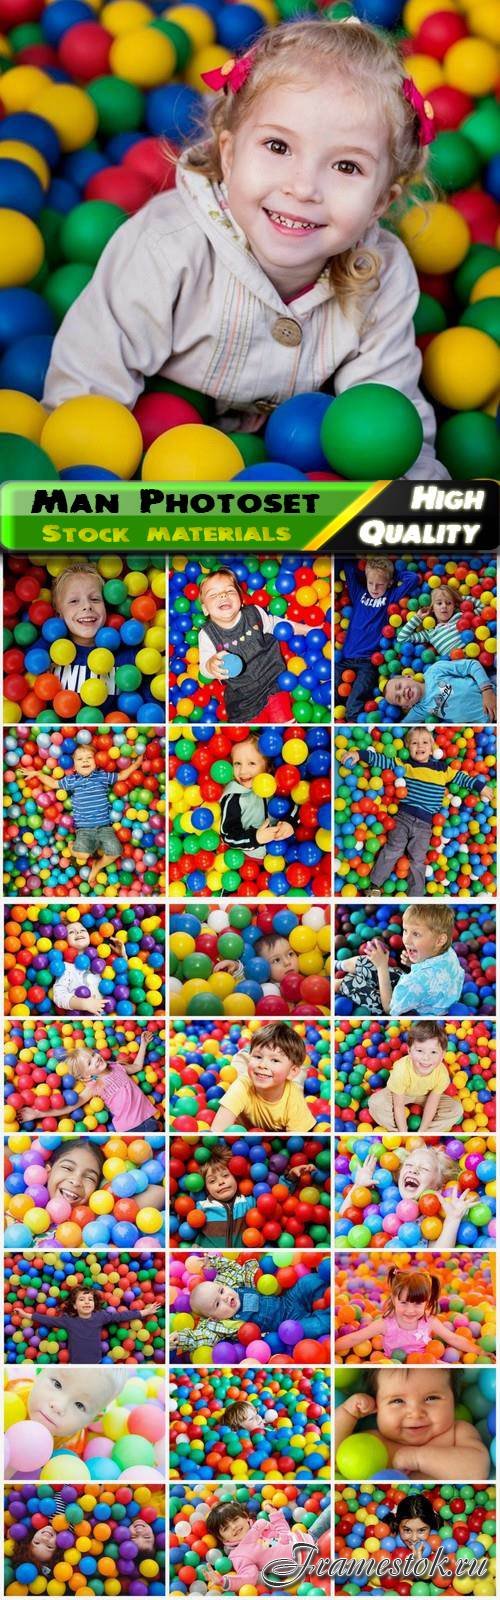 Children and kids have fun in pool of balls - 25 HQ Jpg